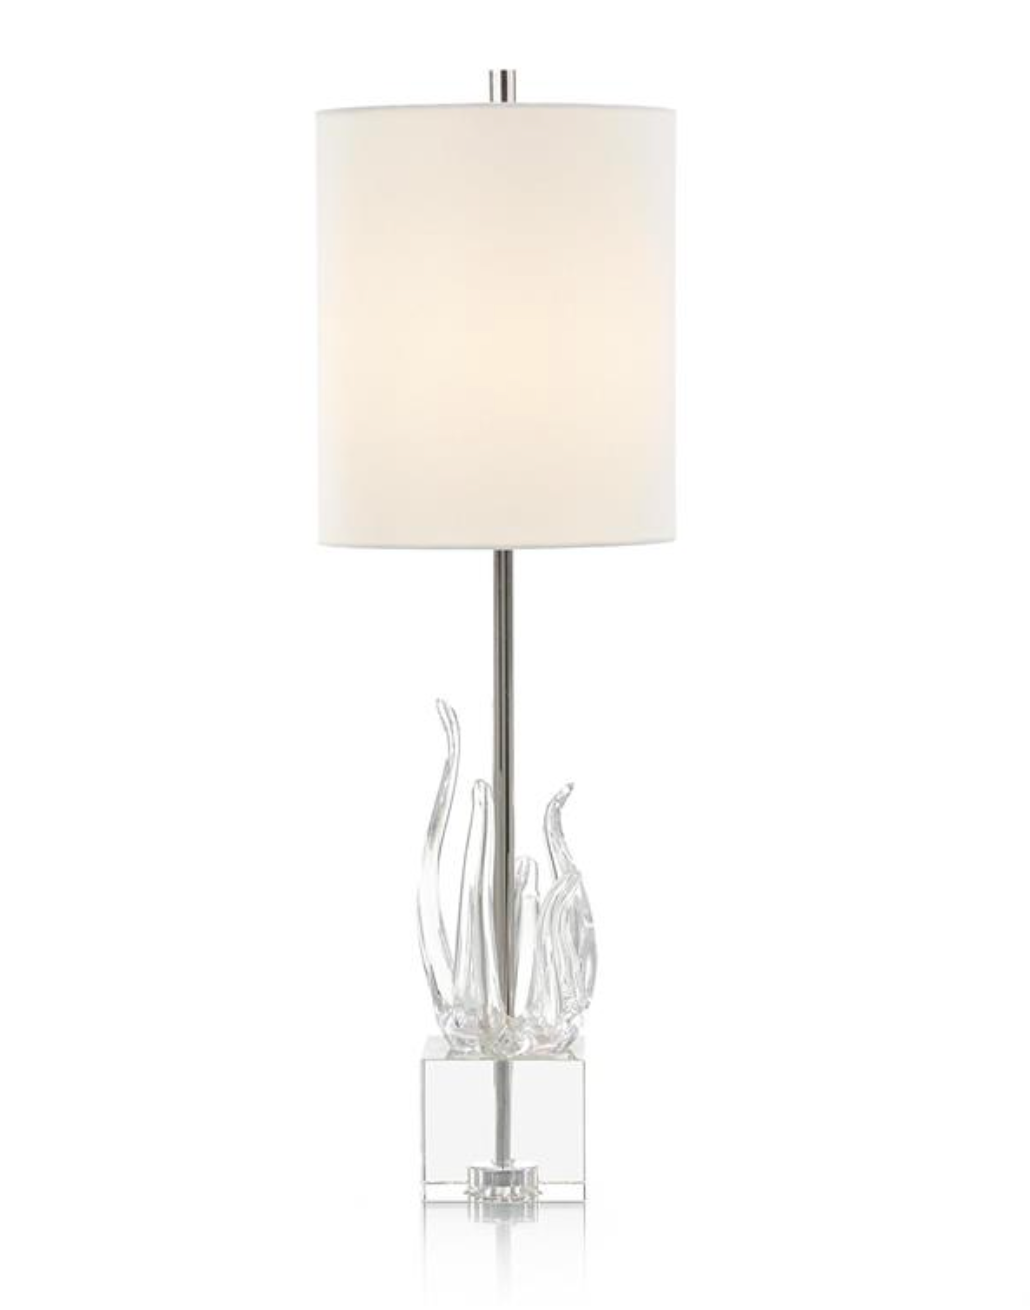 GLASS SCULPTURE TABLE LAMP